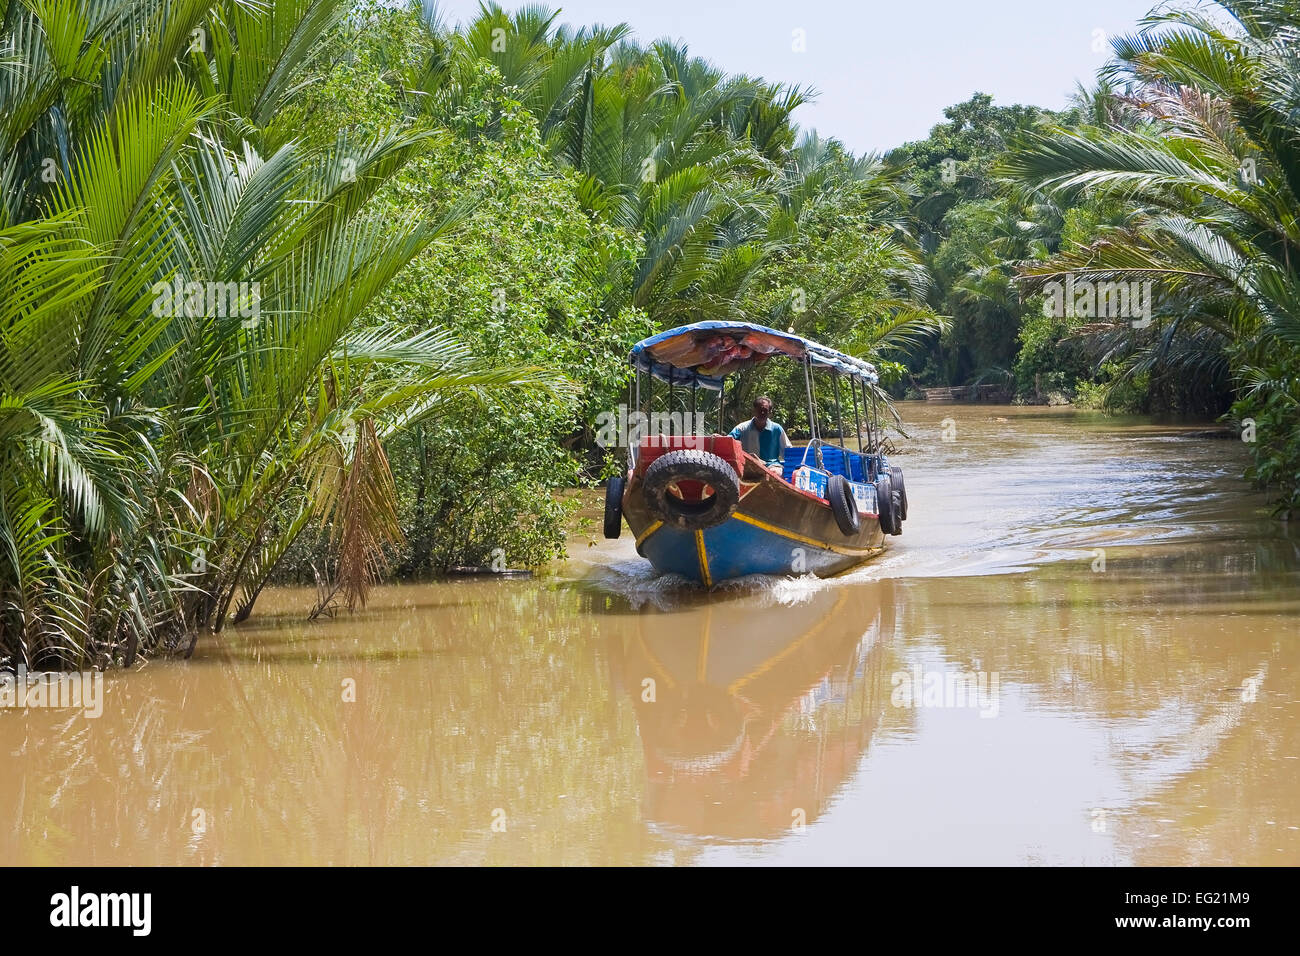 Excursion boat in a side channel of the Mekong, Mekong Delta, Vietnam, Asia Stock Photo